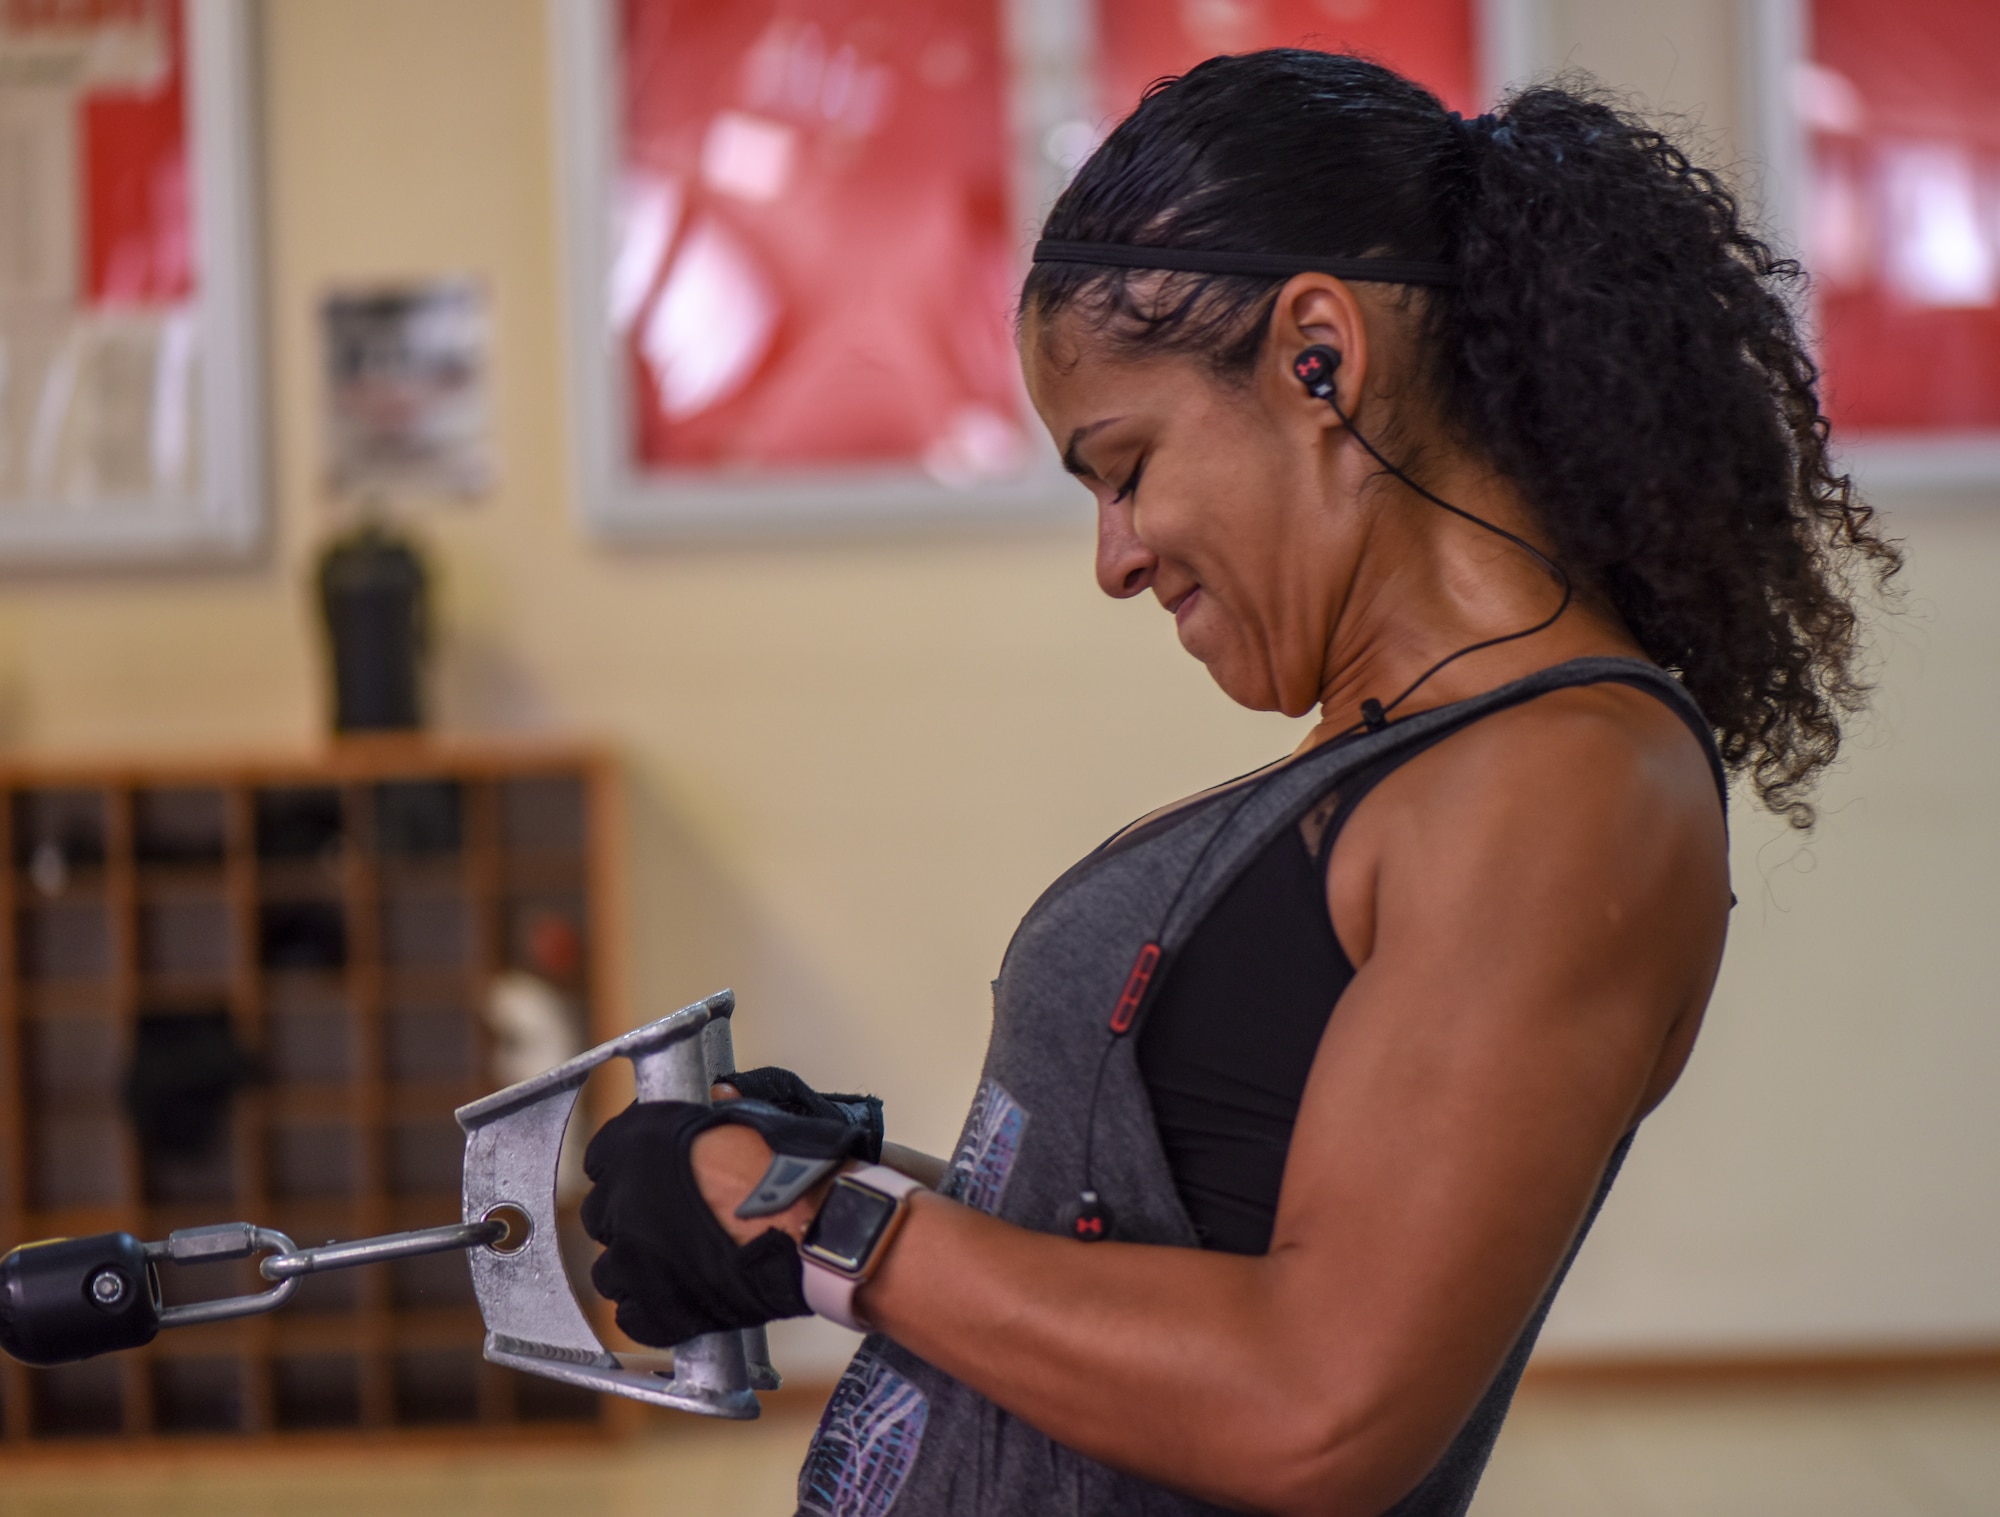 U.S. Air Force Master Sgt. Diana Valdez does a cable row exercises at Incirlik Air Base, Turkey, 2018